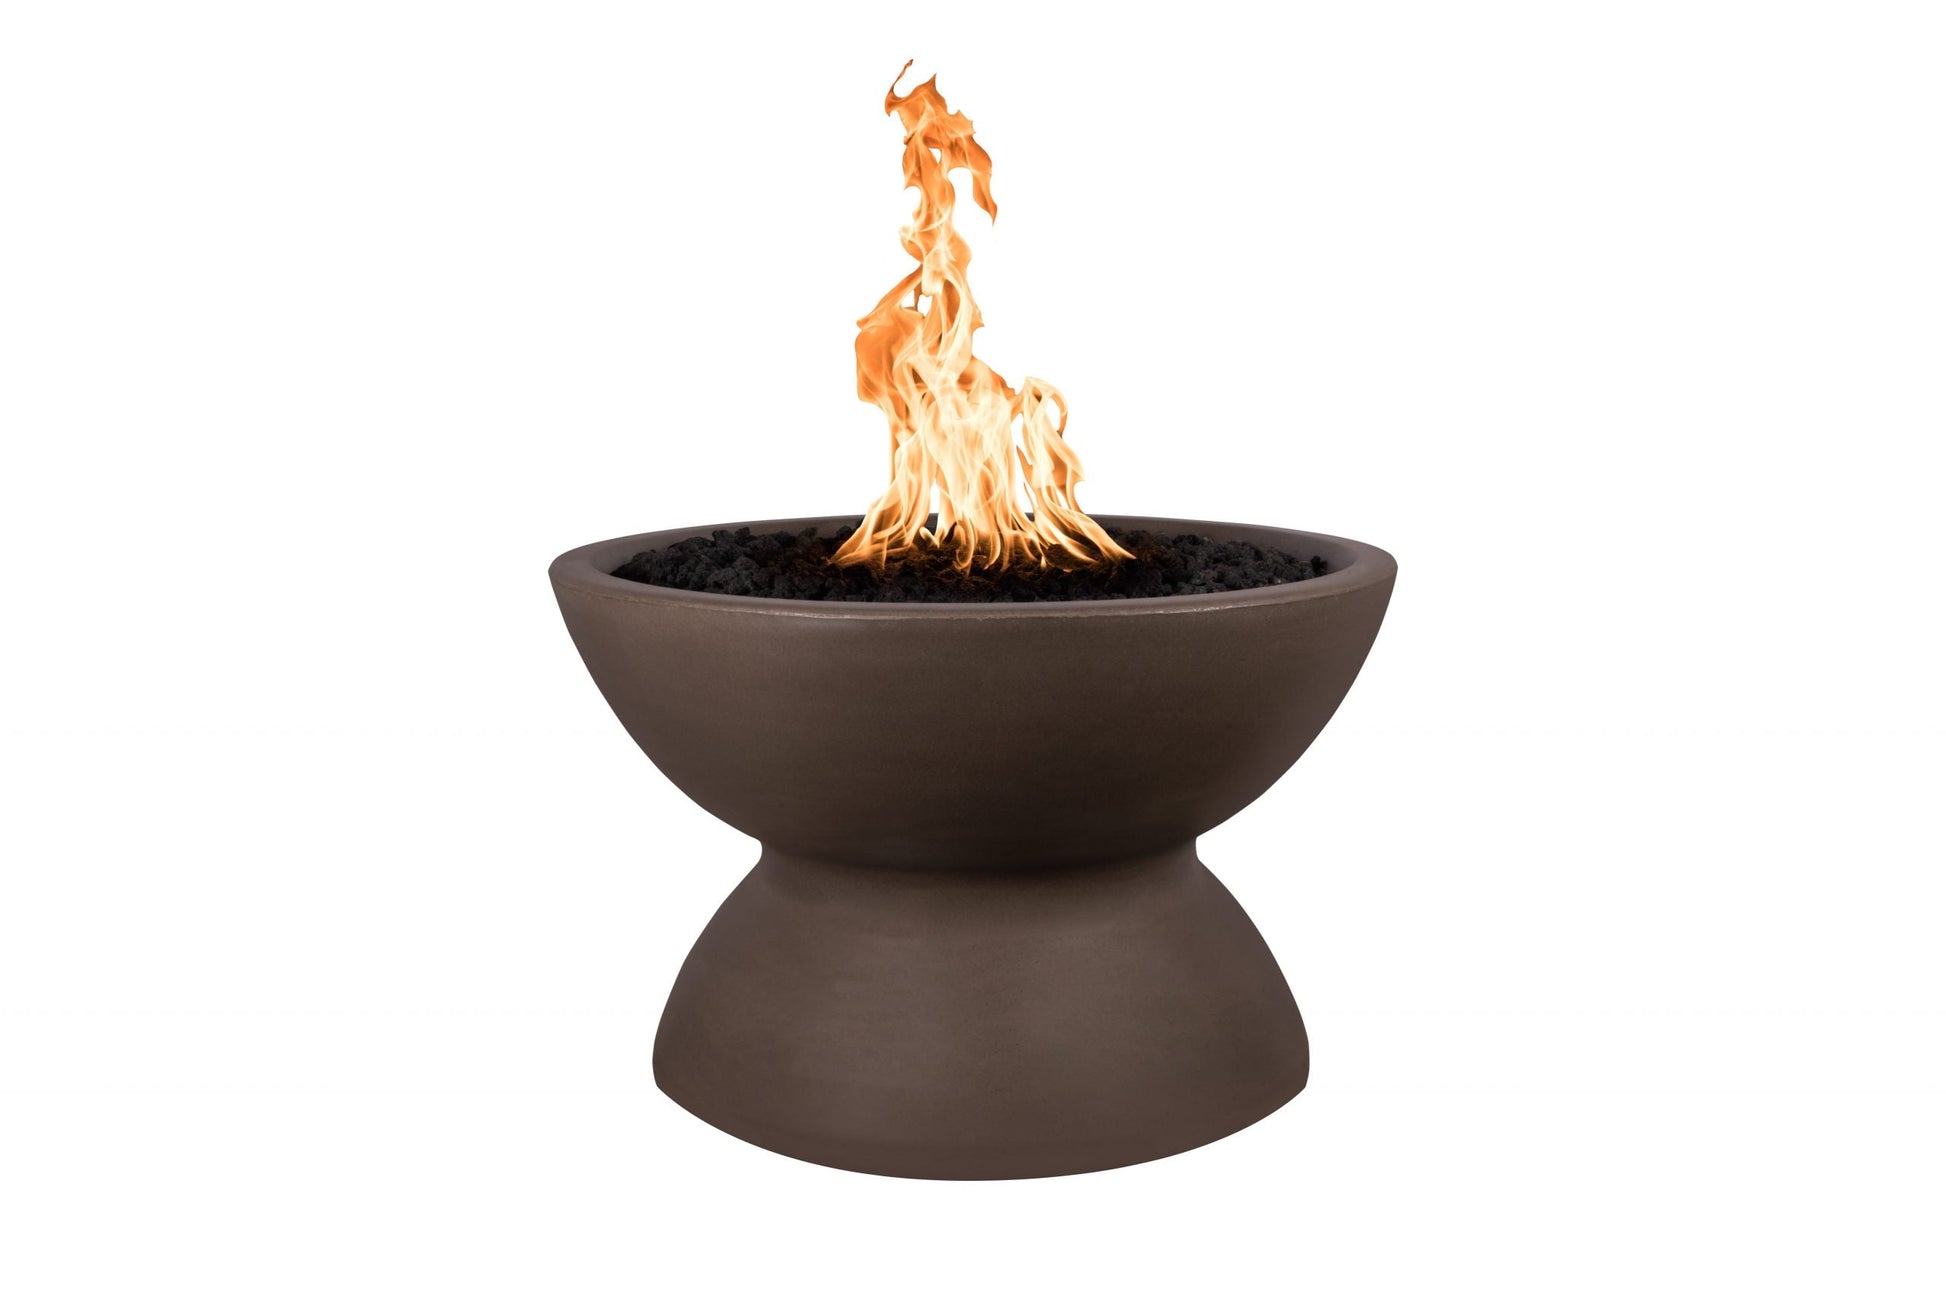 The Outdoor Plus Round Copa 33" Brown GFRC Concrete Liquid Propane Fire Pit with Match Lit Ignition